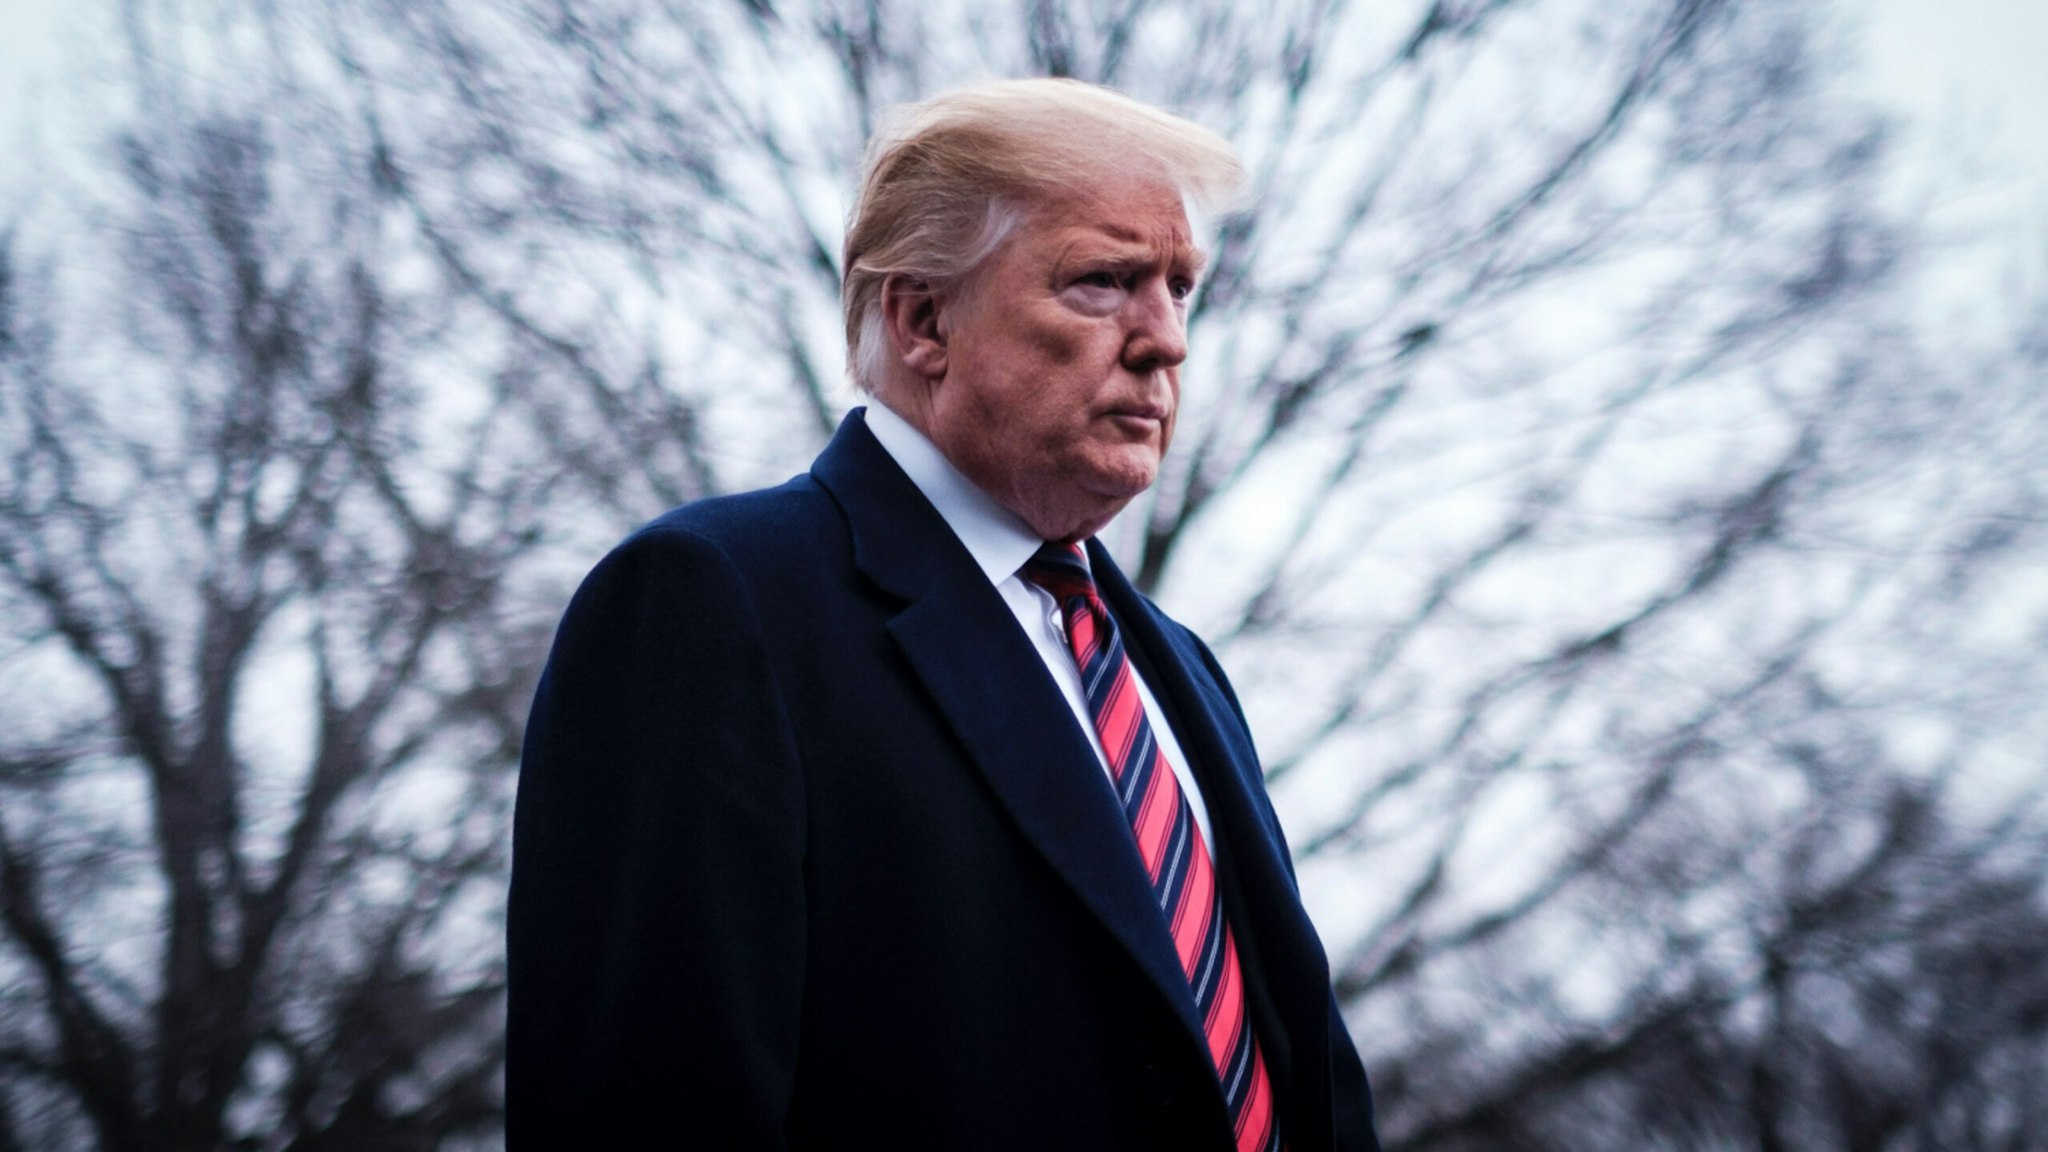 U.S. President Donald Trump stops to speak to reporters as he prepared to board Marine One on the South Lawn of the White House on January 19, 2019 in Washington, DC.